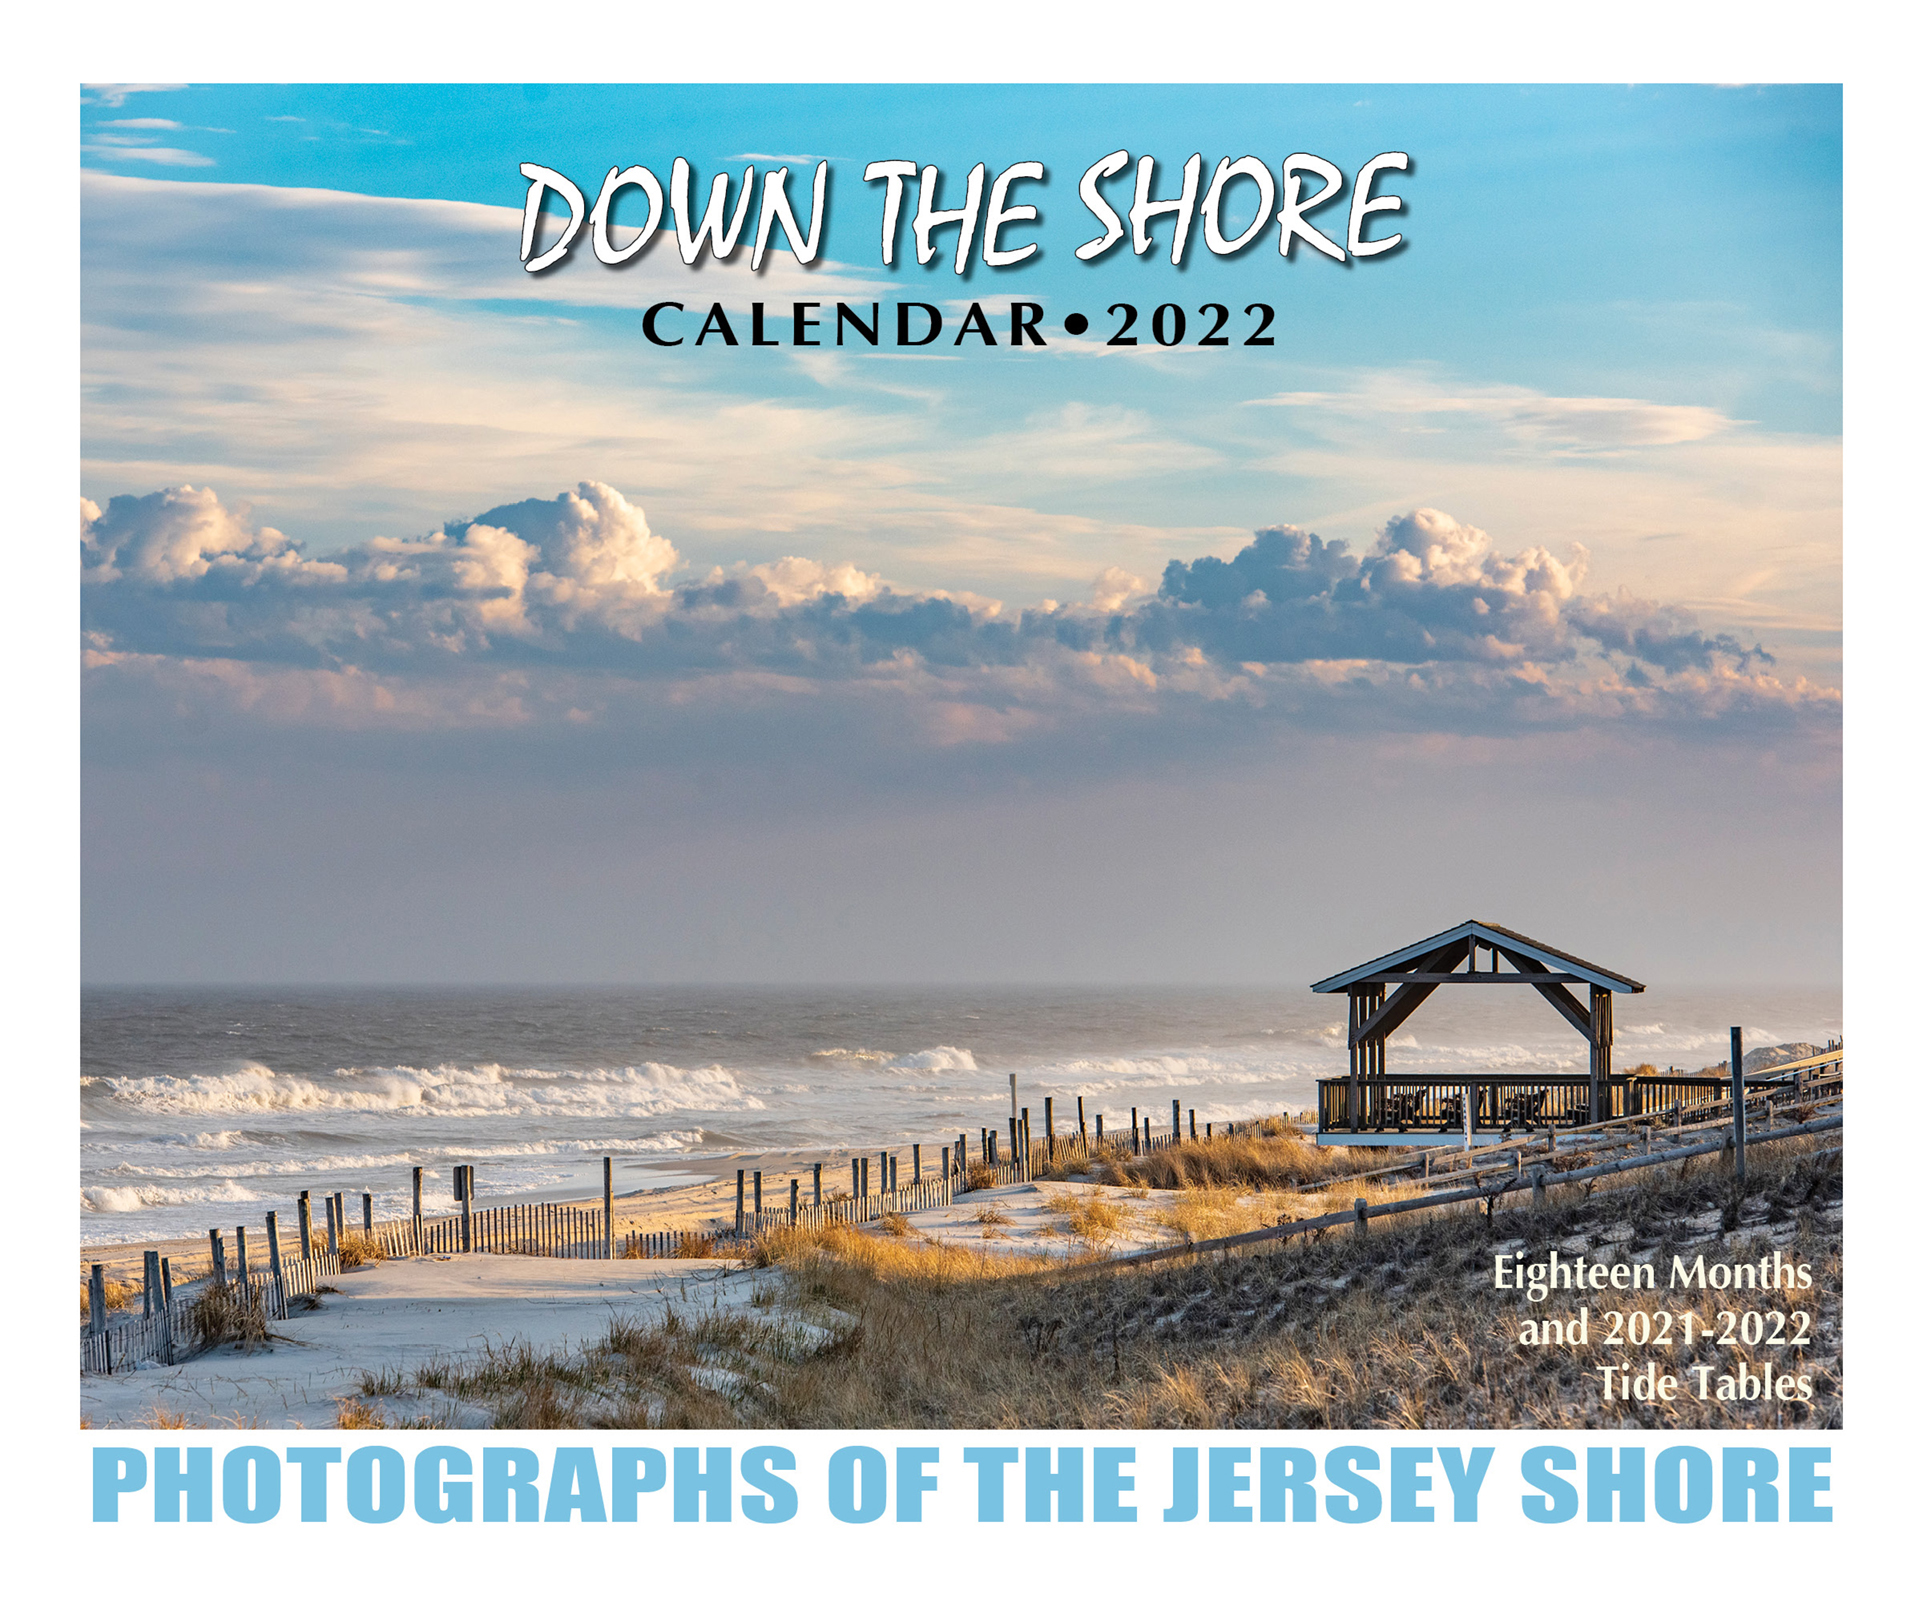 wildwood-nj-calendar-of-events-2022-new-orleans-events-2022